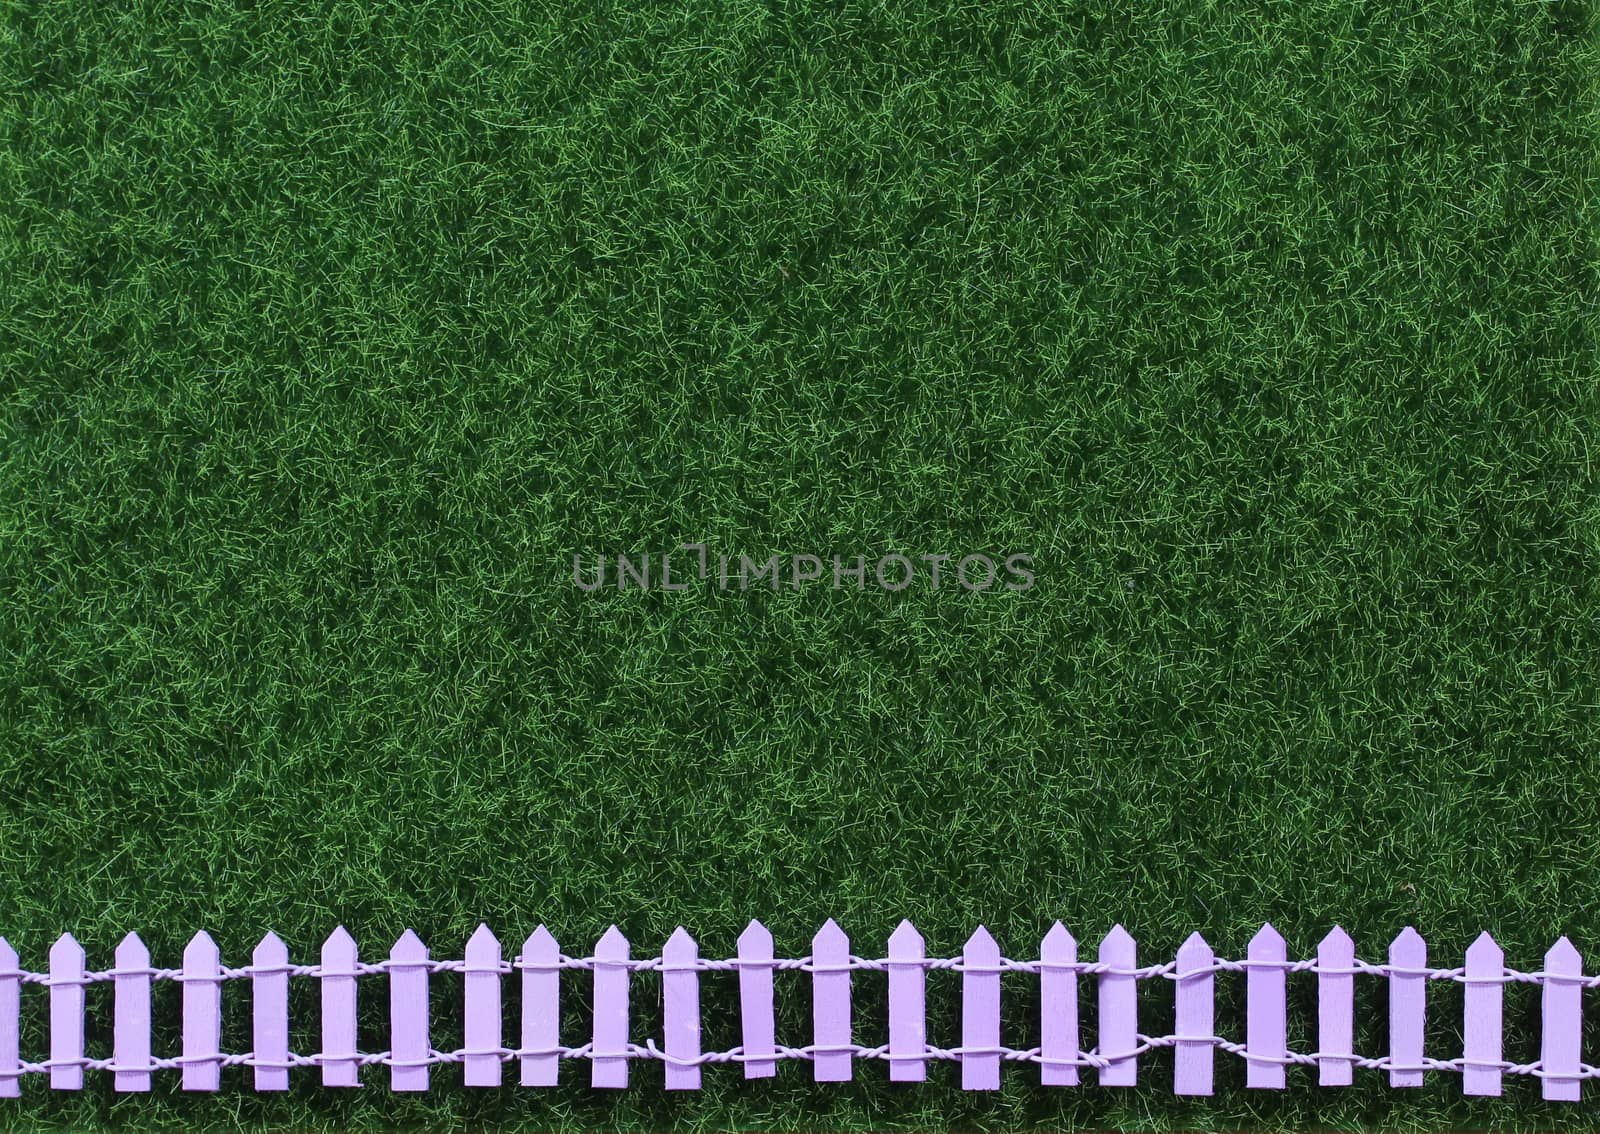 Artificial Green Grass With Picket Fence by Marti157900